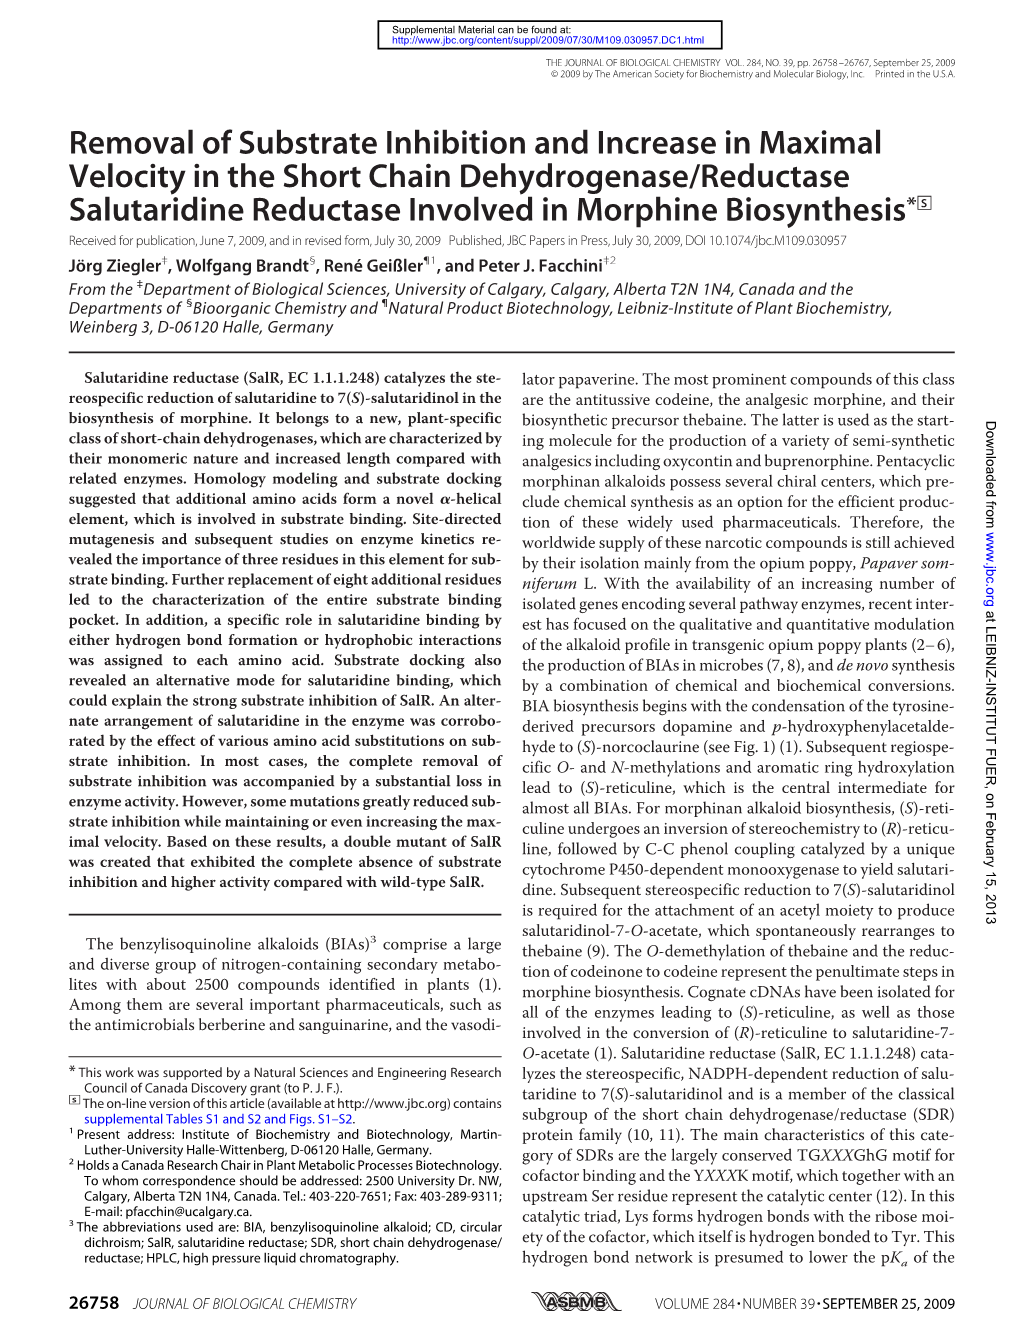 Removal of Substrate Inhibition and Increase in Maximal Velocity in the Short Chain Dehydrogenase/Reductase Salutaridine Reducta